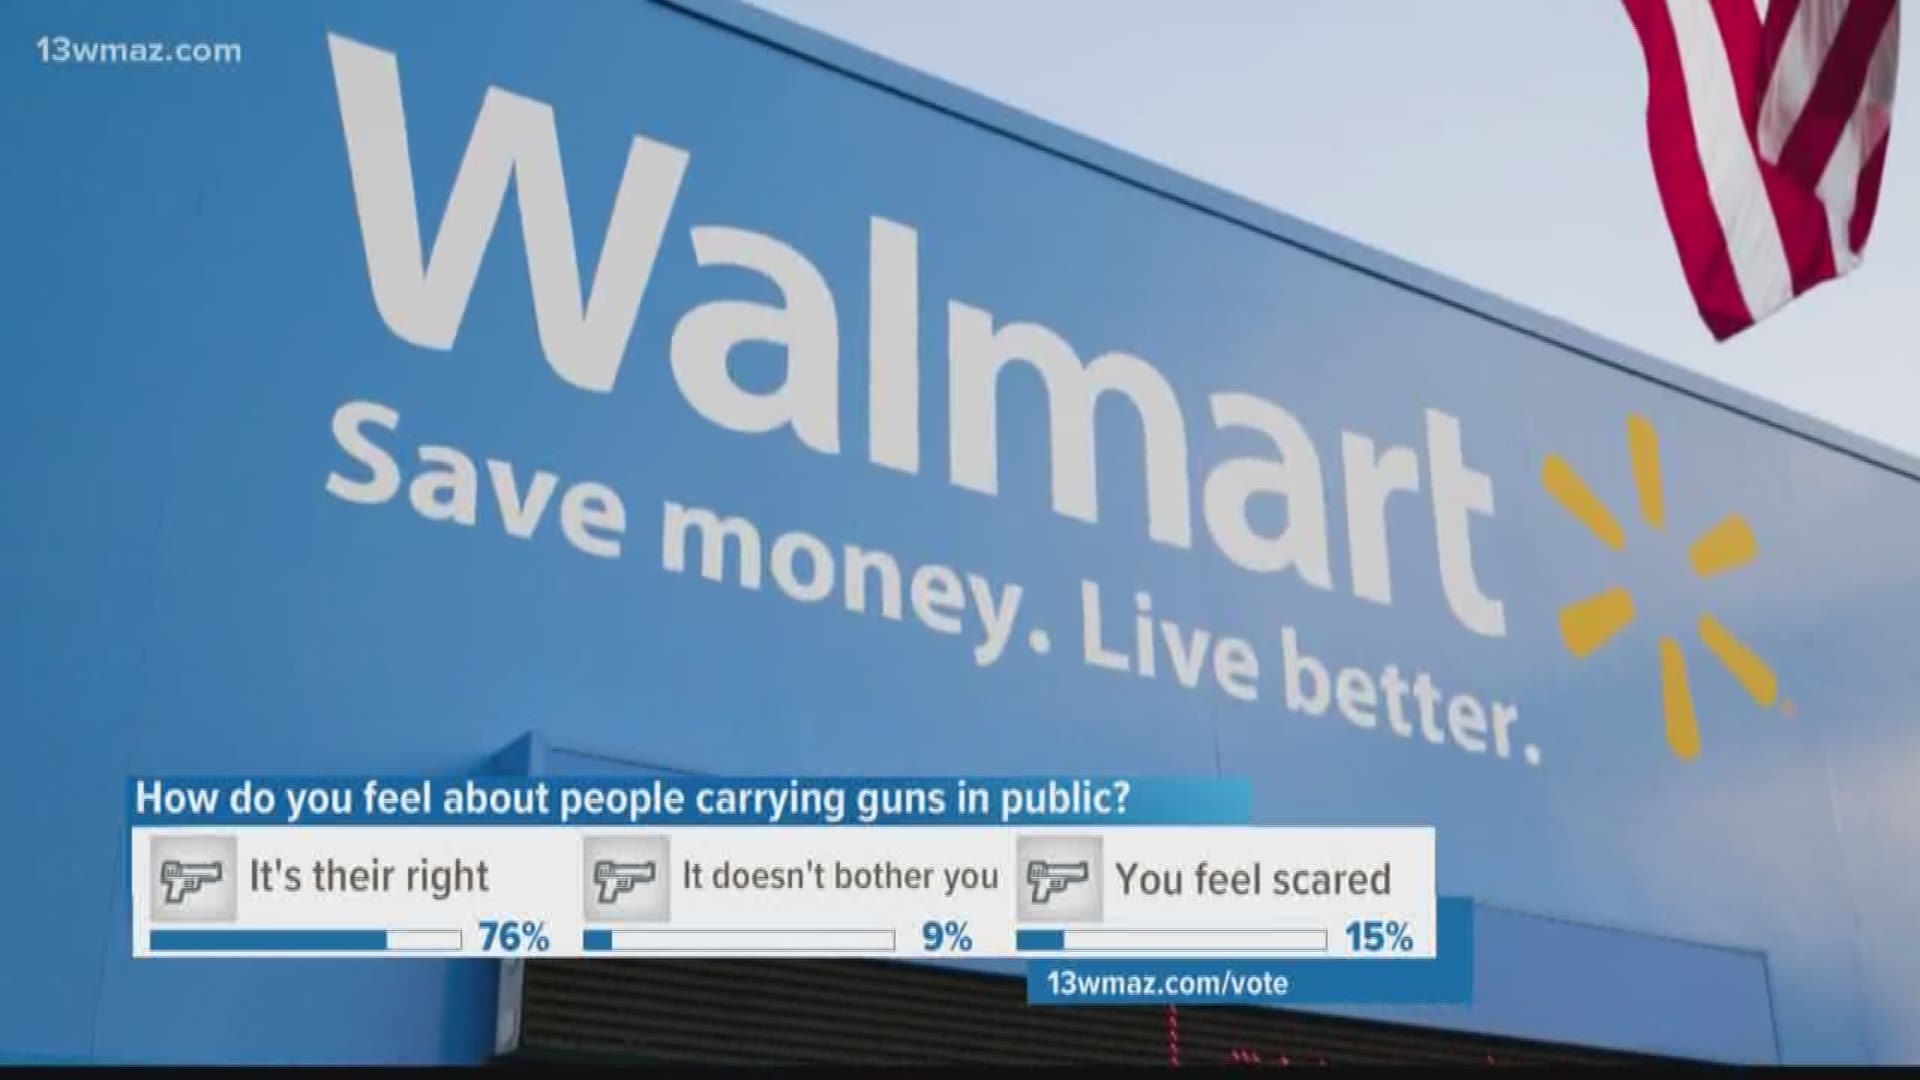 Walmart rolled out new gun policies last week.
They intend to stop selling short-barrel rifle and handgun ammo. They also asked people to stop openly carrying firearms in their stores.